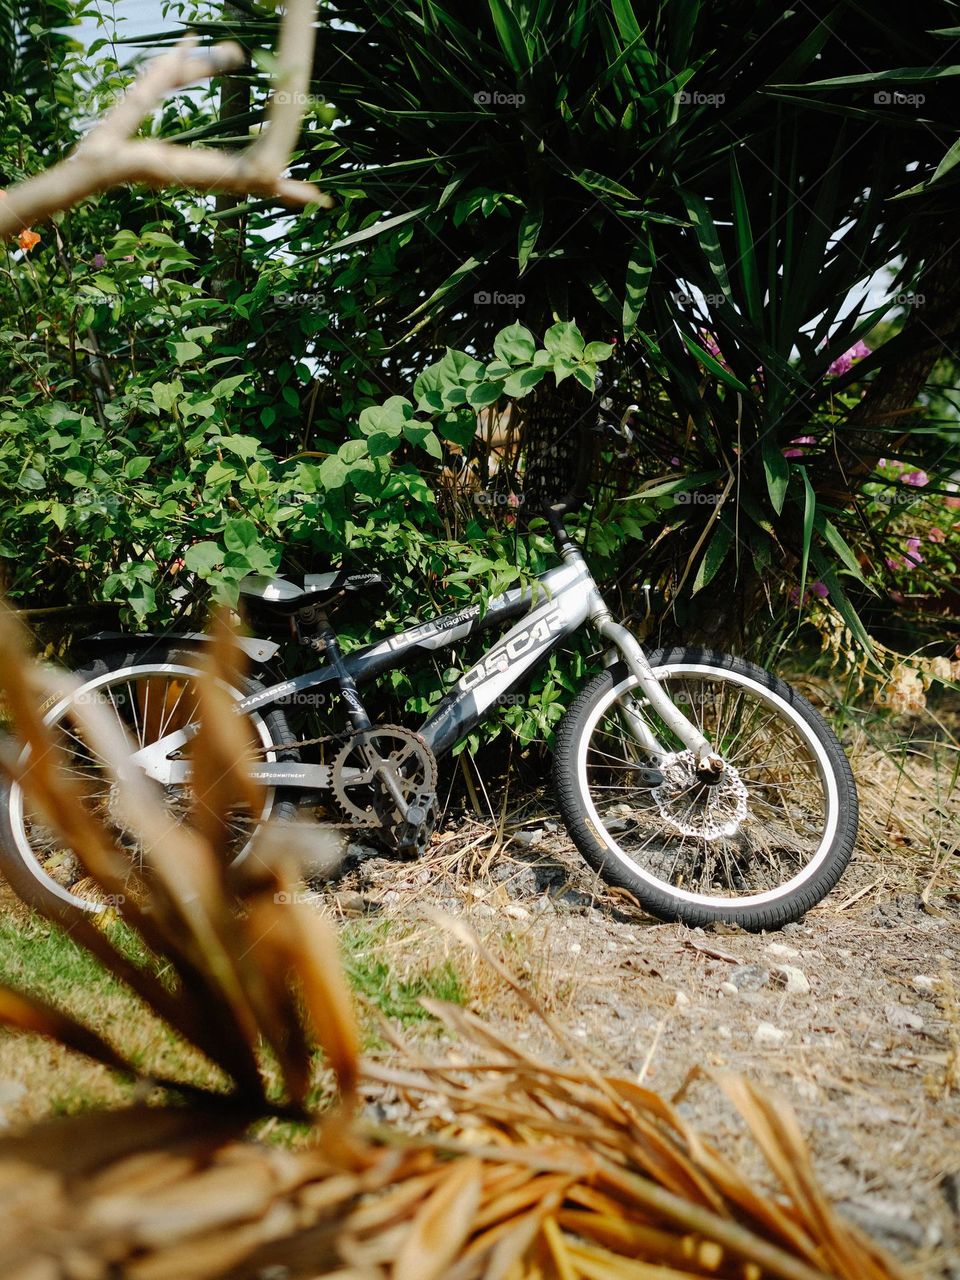 Abondoned bicycle put to rest in the backyard